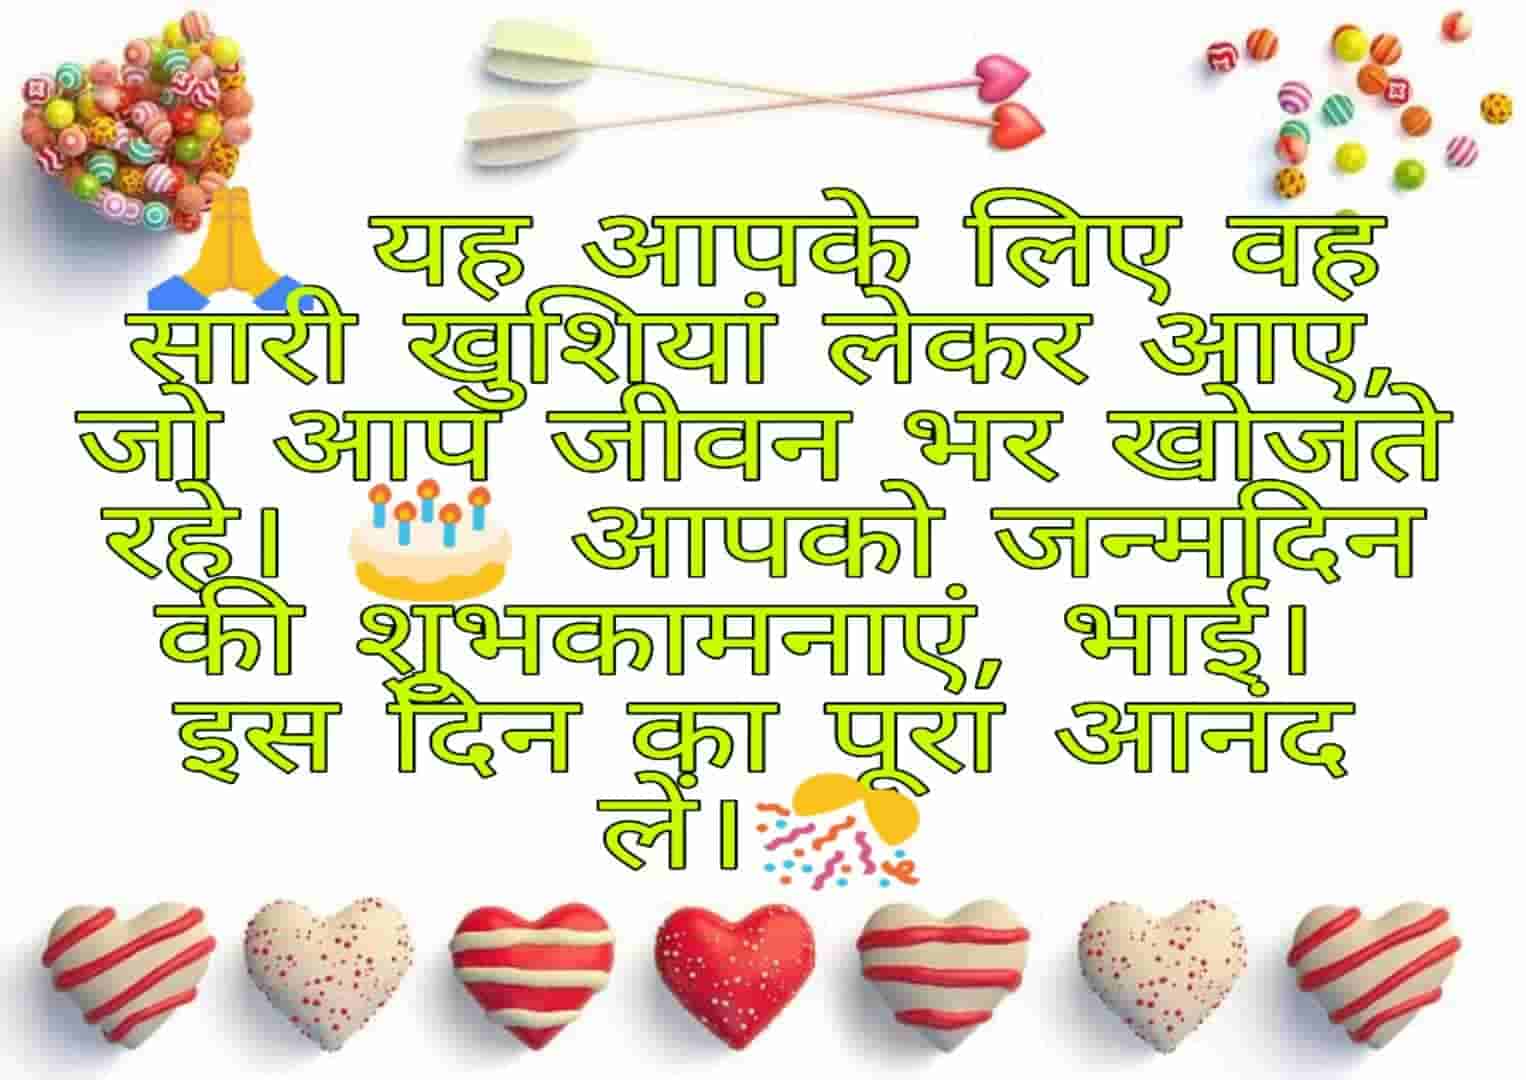 happy birthday wishes for friend message in hindi